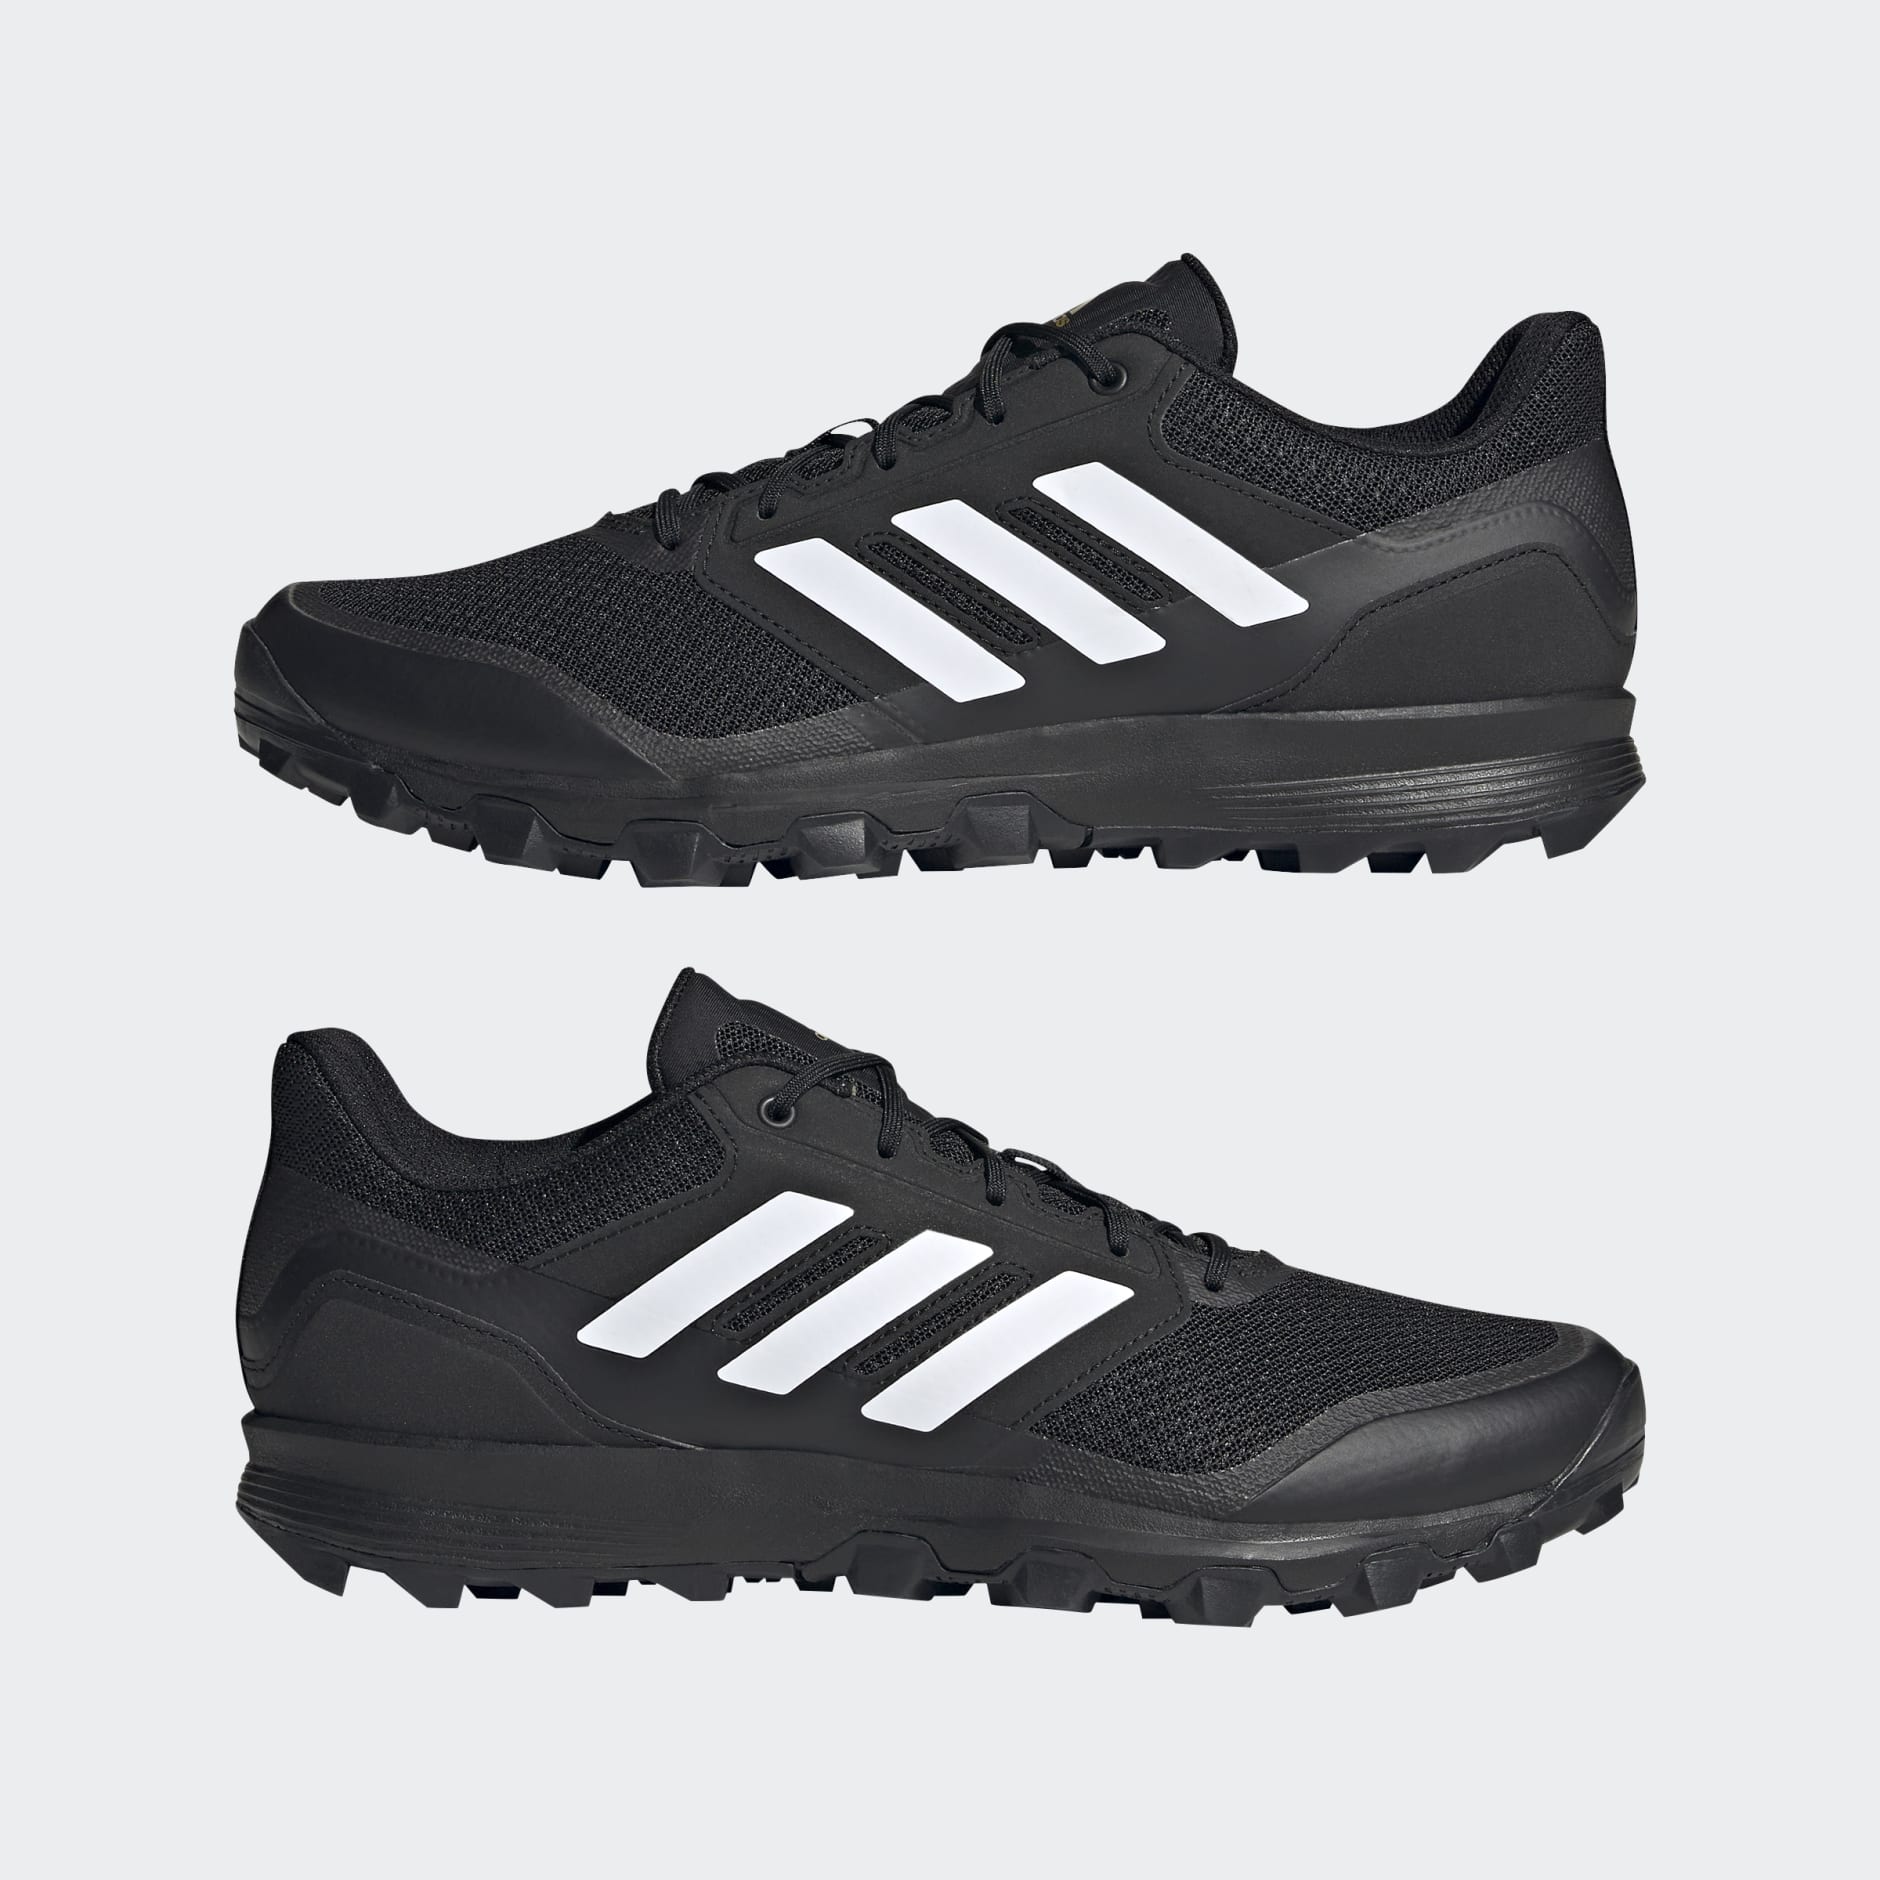 All products - Flexcloud 2.1 Field Hockey Shoes - Black | adidas South ...